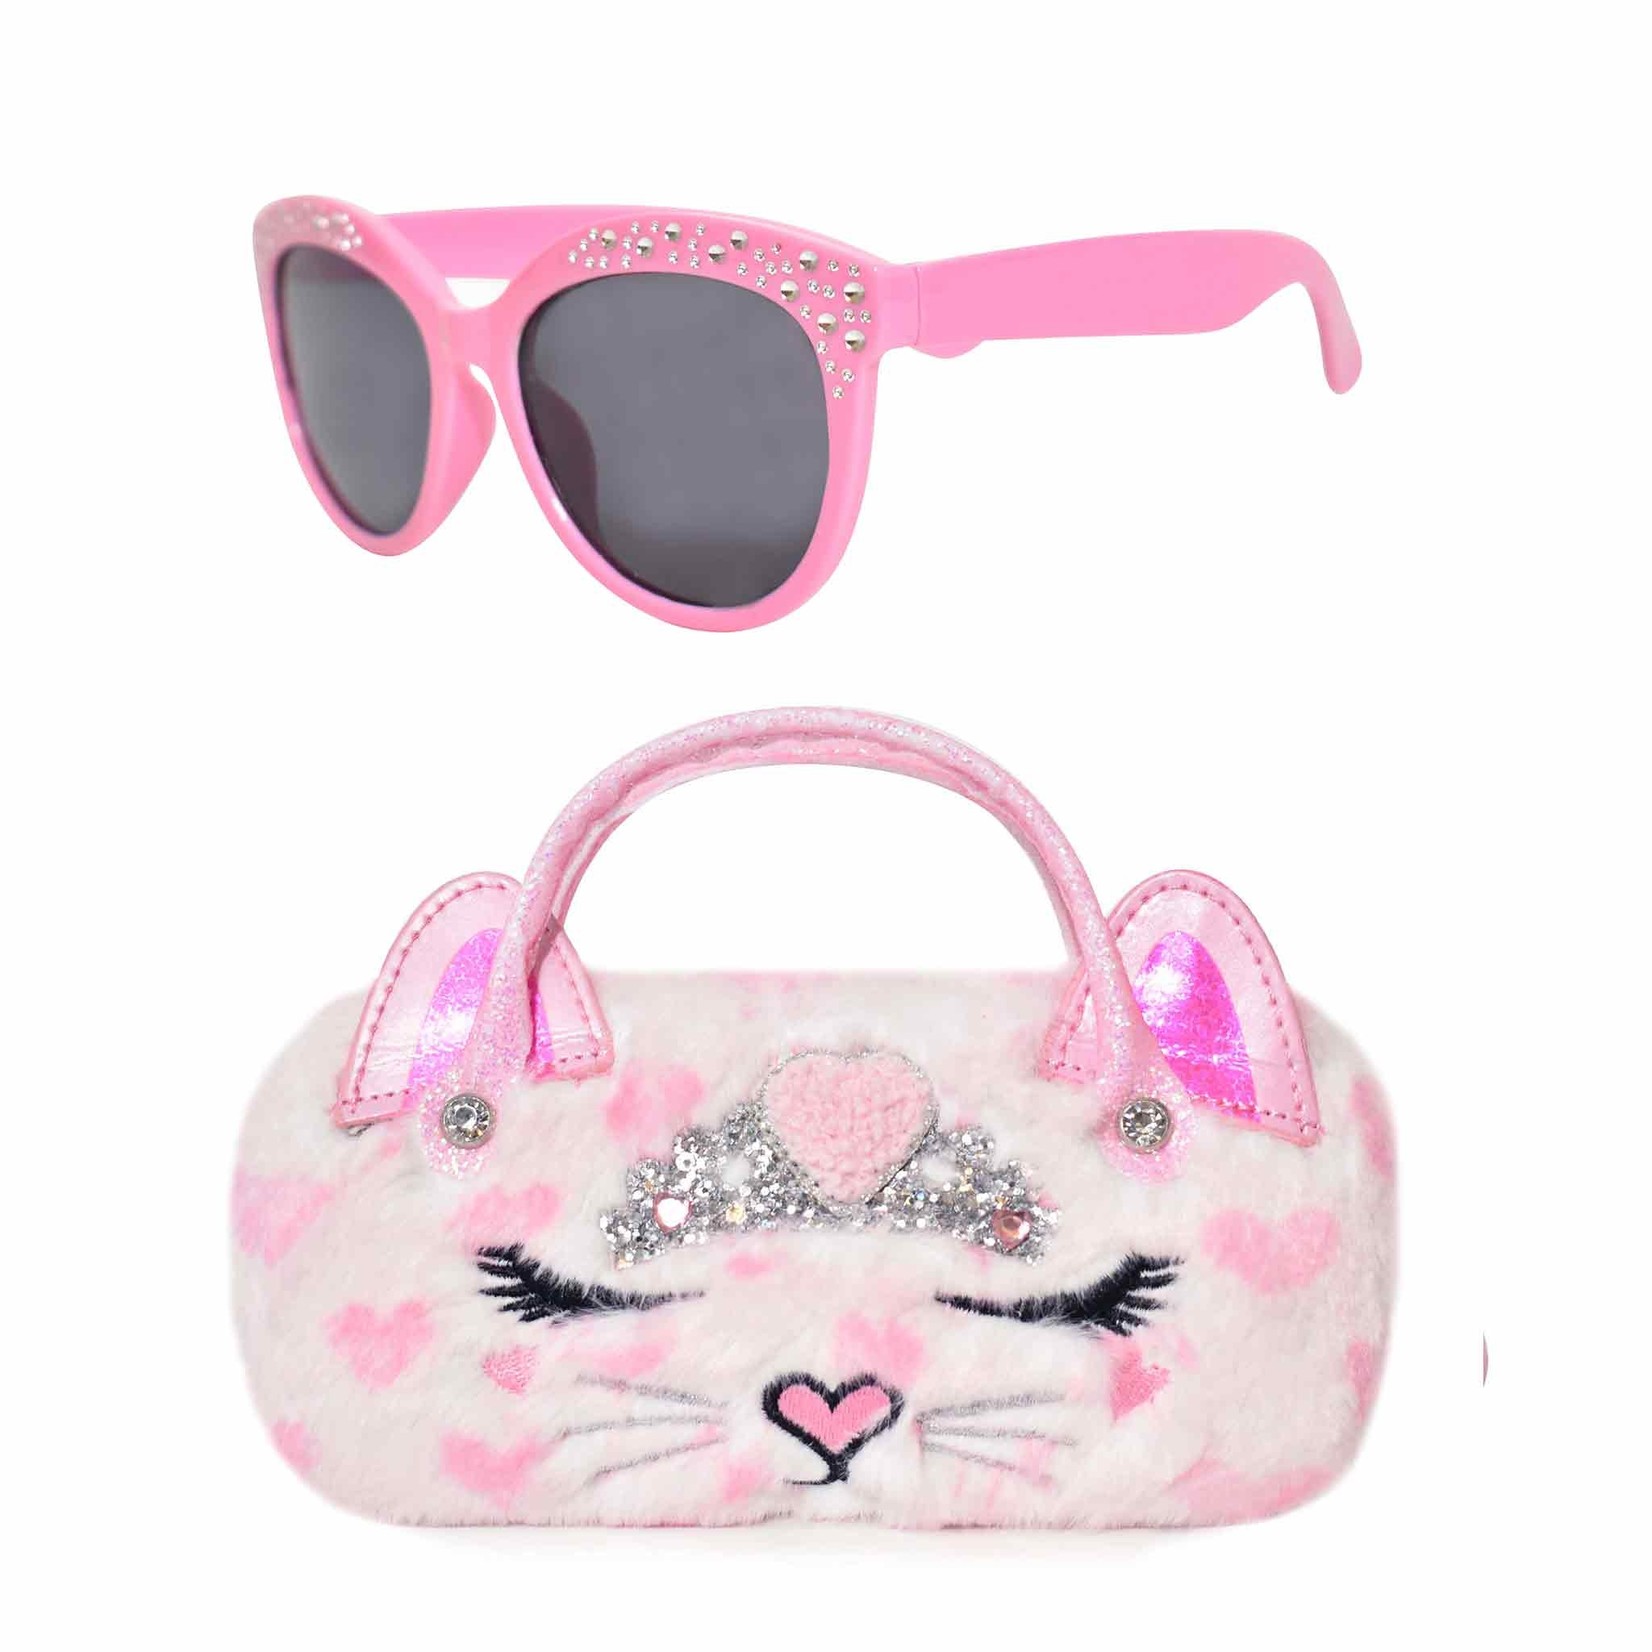 MISS BELLA KITTY HEART SUNGLASSES WITH CASE